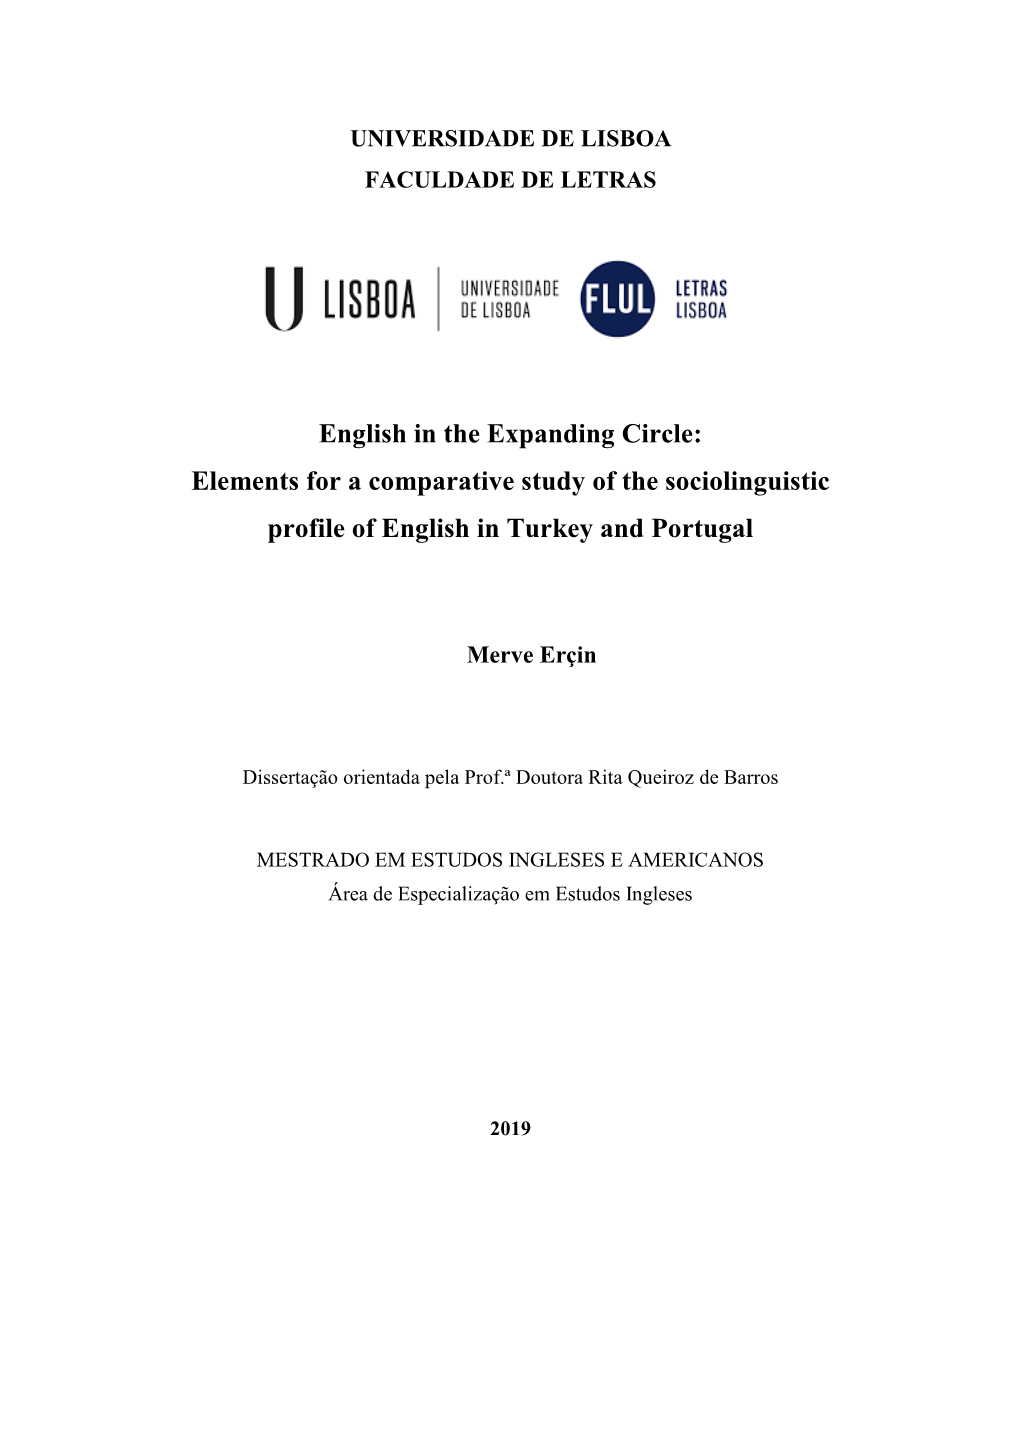 English in the Expanding Circle: Elements for a Comparative Study of the Sociolinguistic Profile of English in Turkey and Portugal